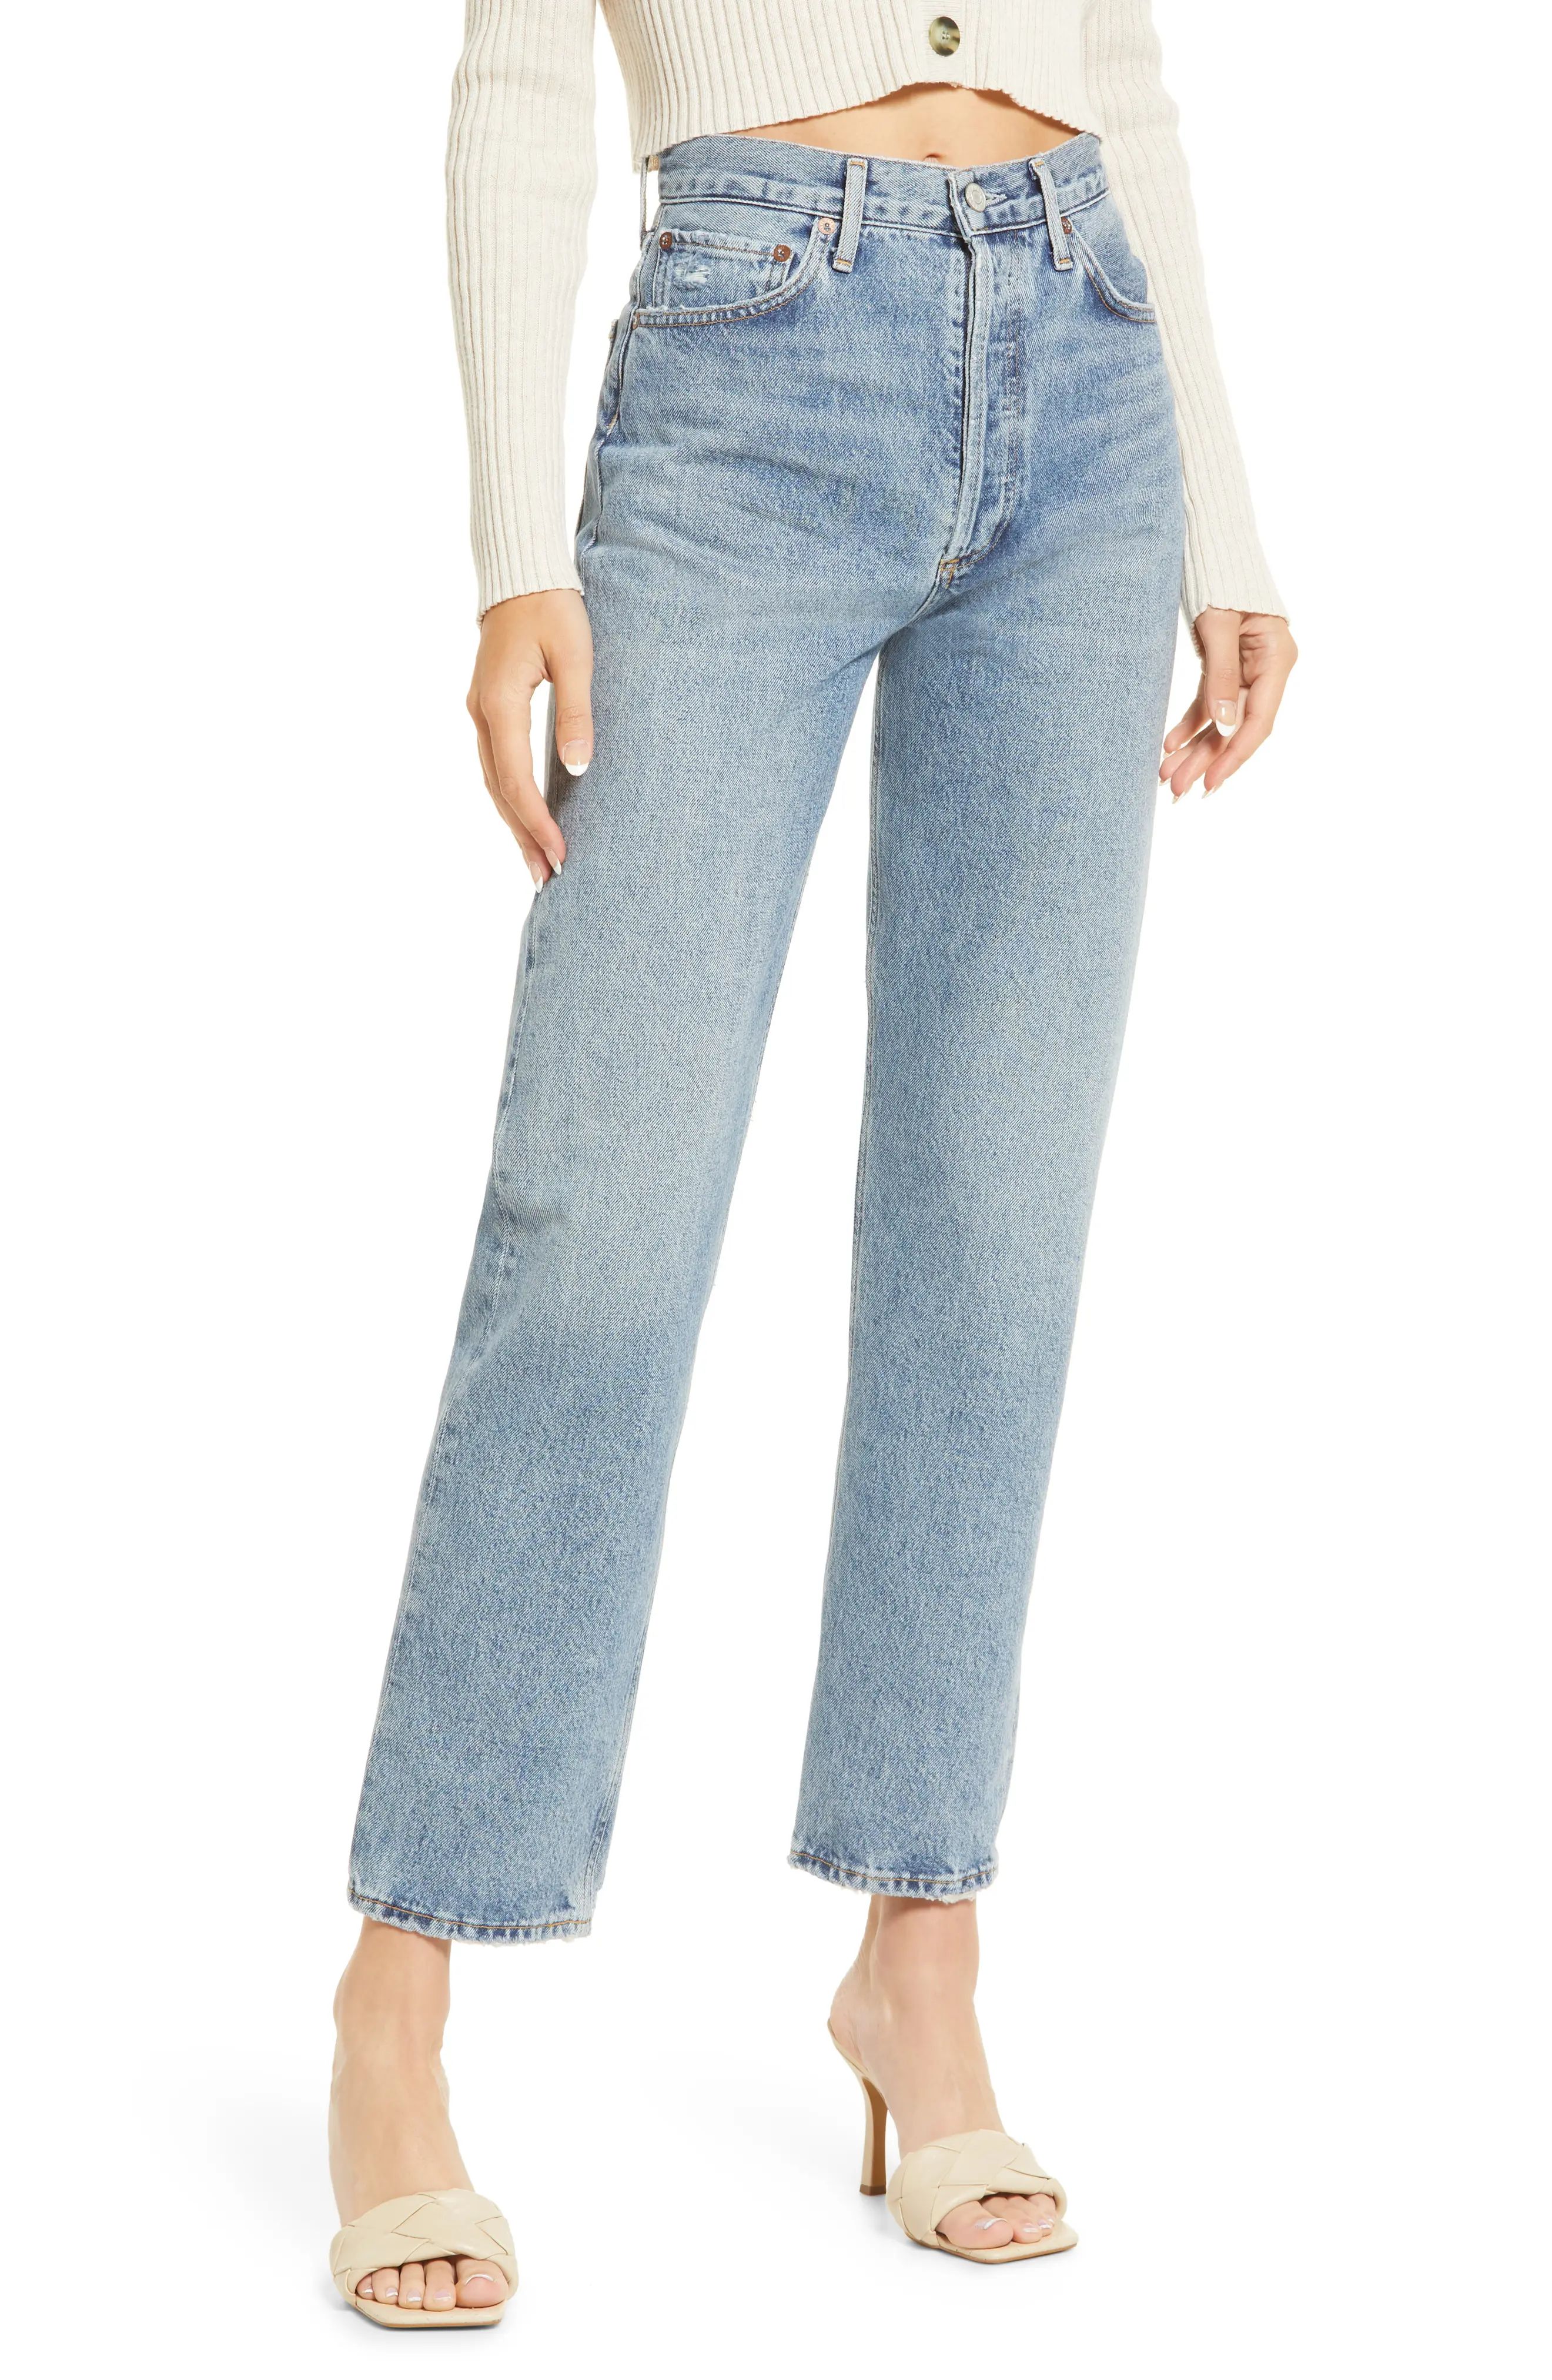 AGOLDE '90s Pinch High Waist Straight Leg Organic Cotton Jeans, Size 24 in Endless Md Indigo at Nord | Nordstrom